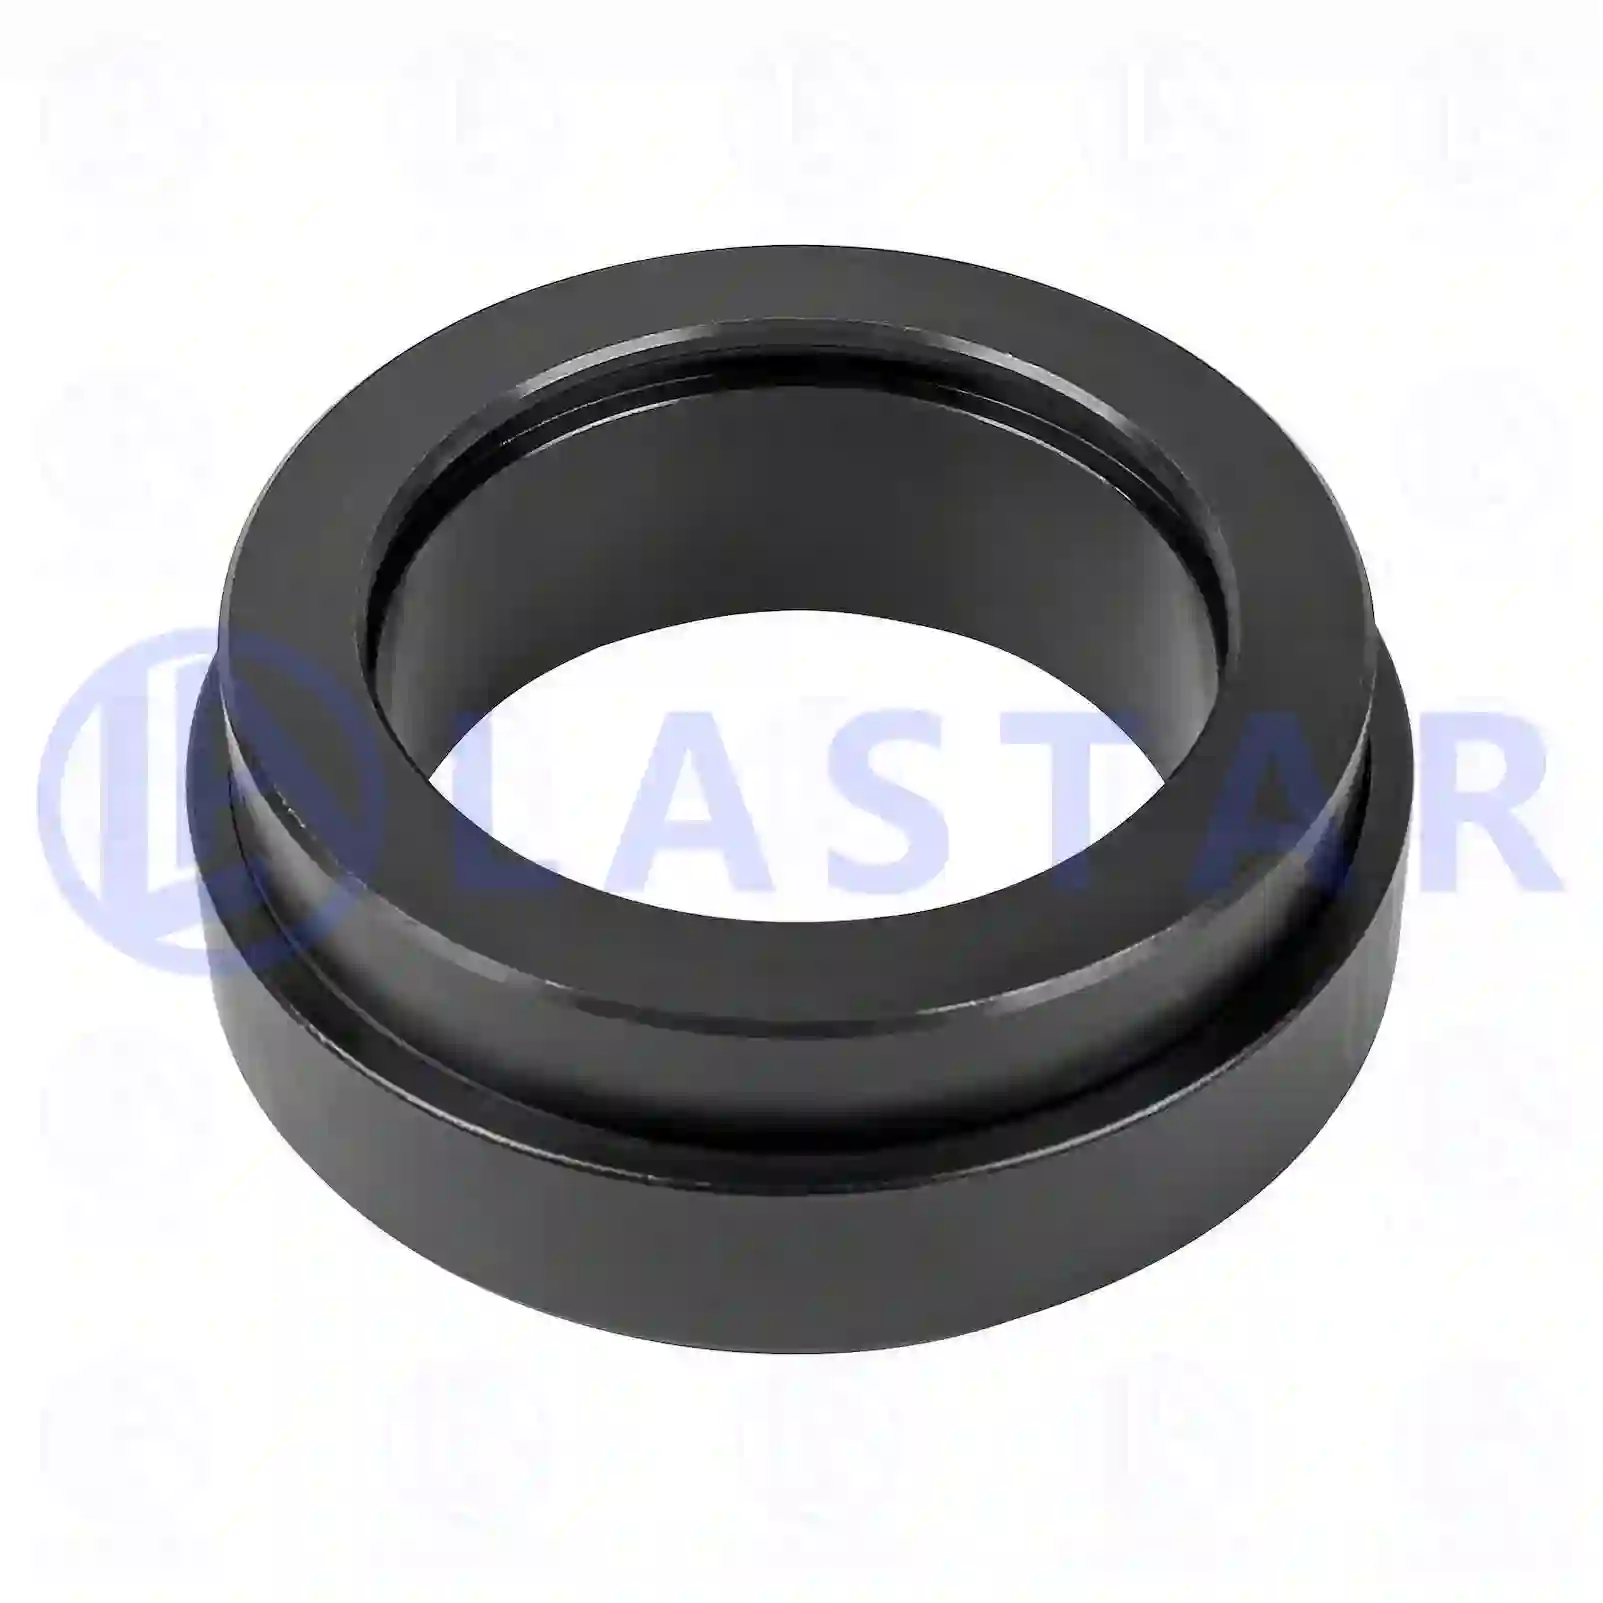 Leaf Spring Joint bearing, la no: 77729222 ,  oem no:08138307, 8138307, Lastar Spare Part | Truck Spare Parts, Auotomotive Spare Parts